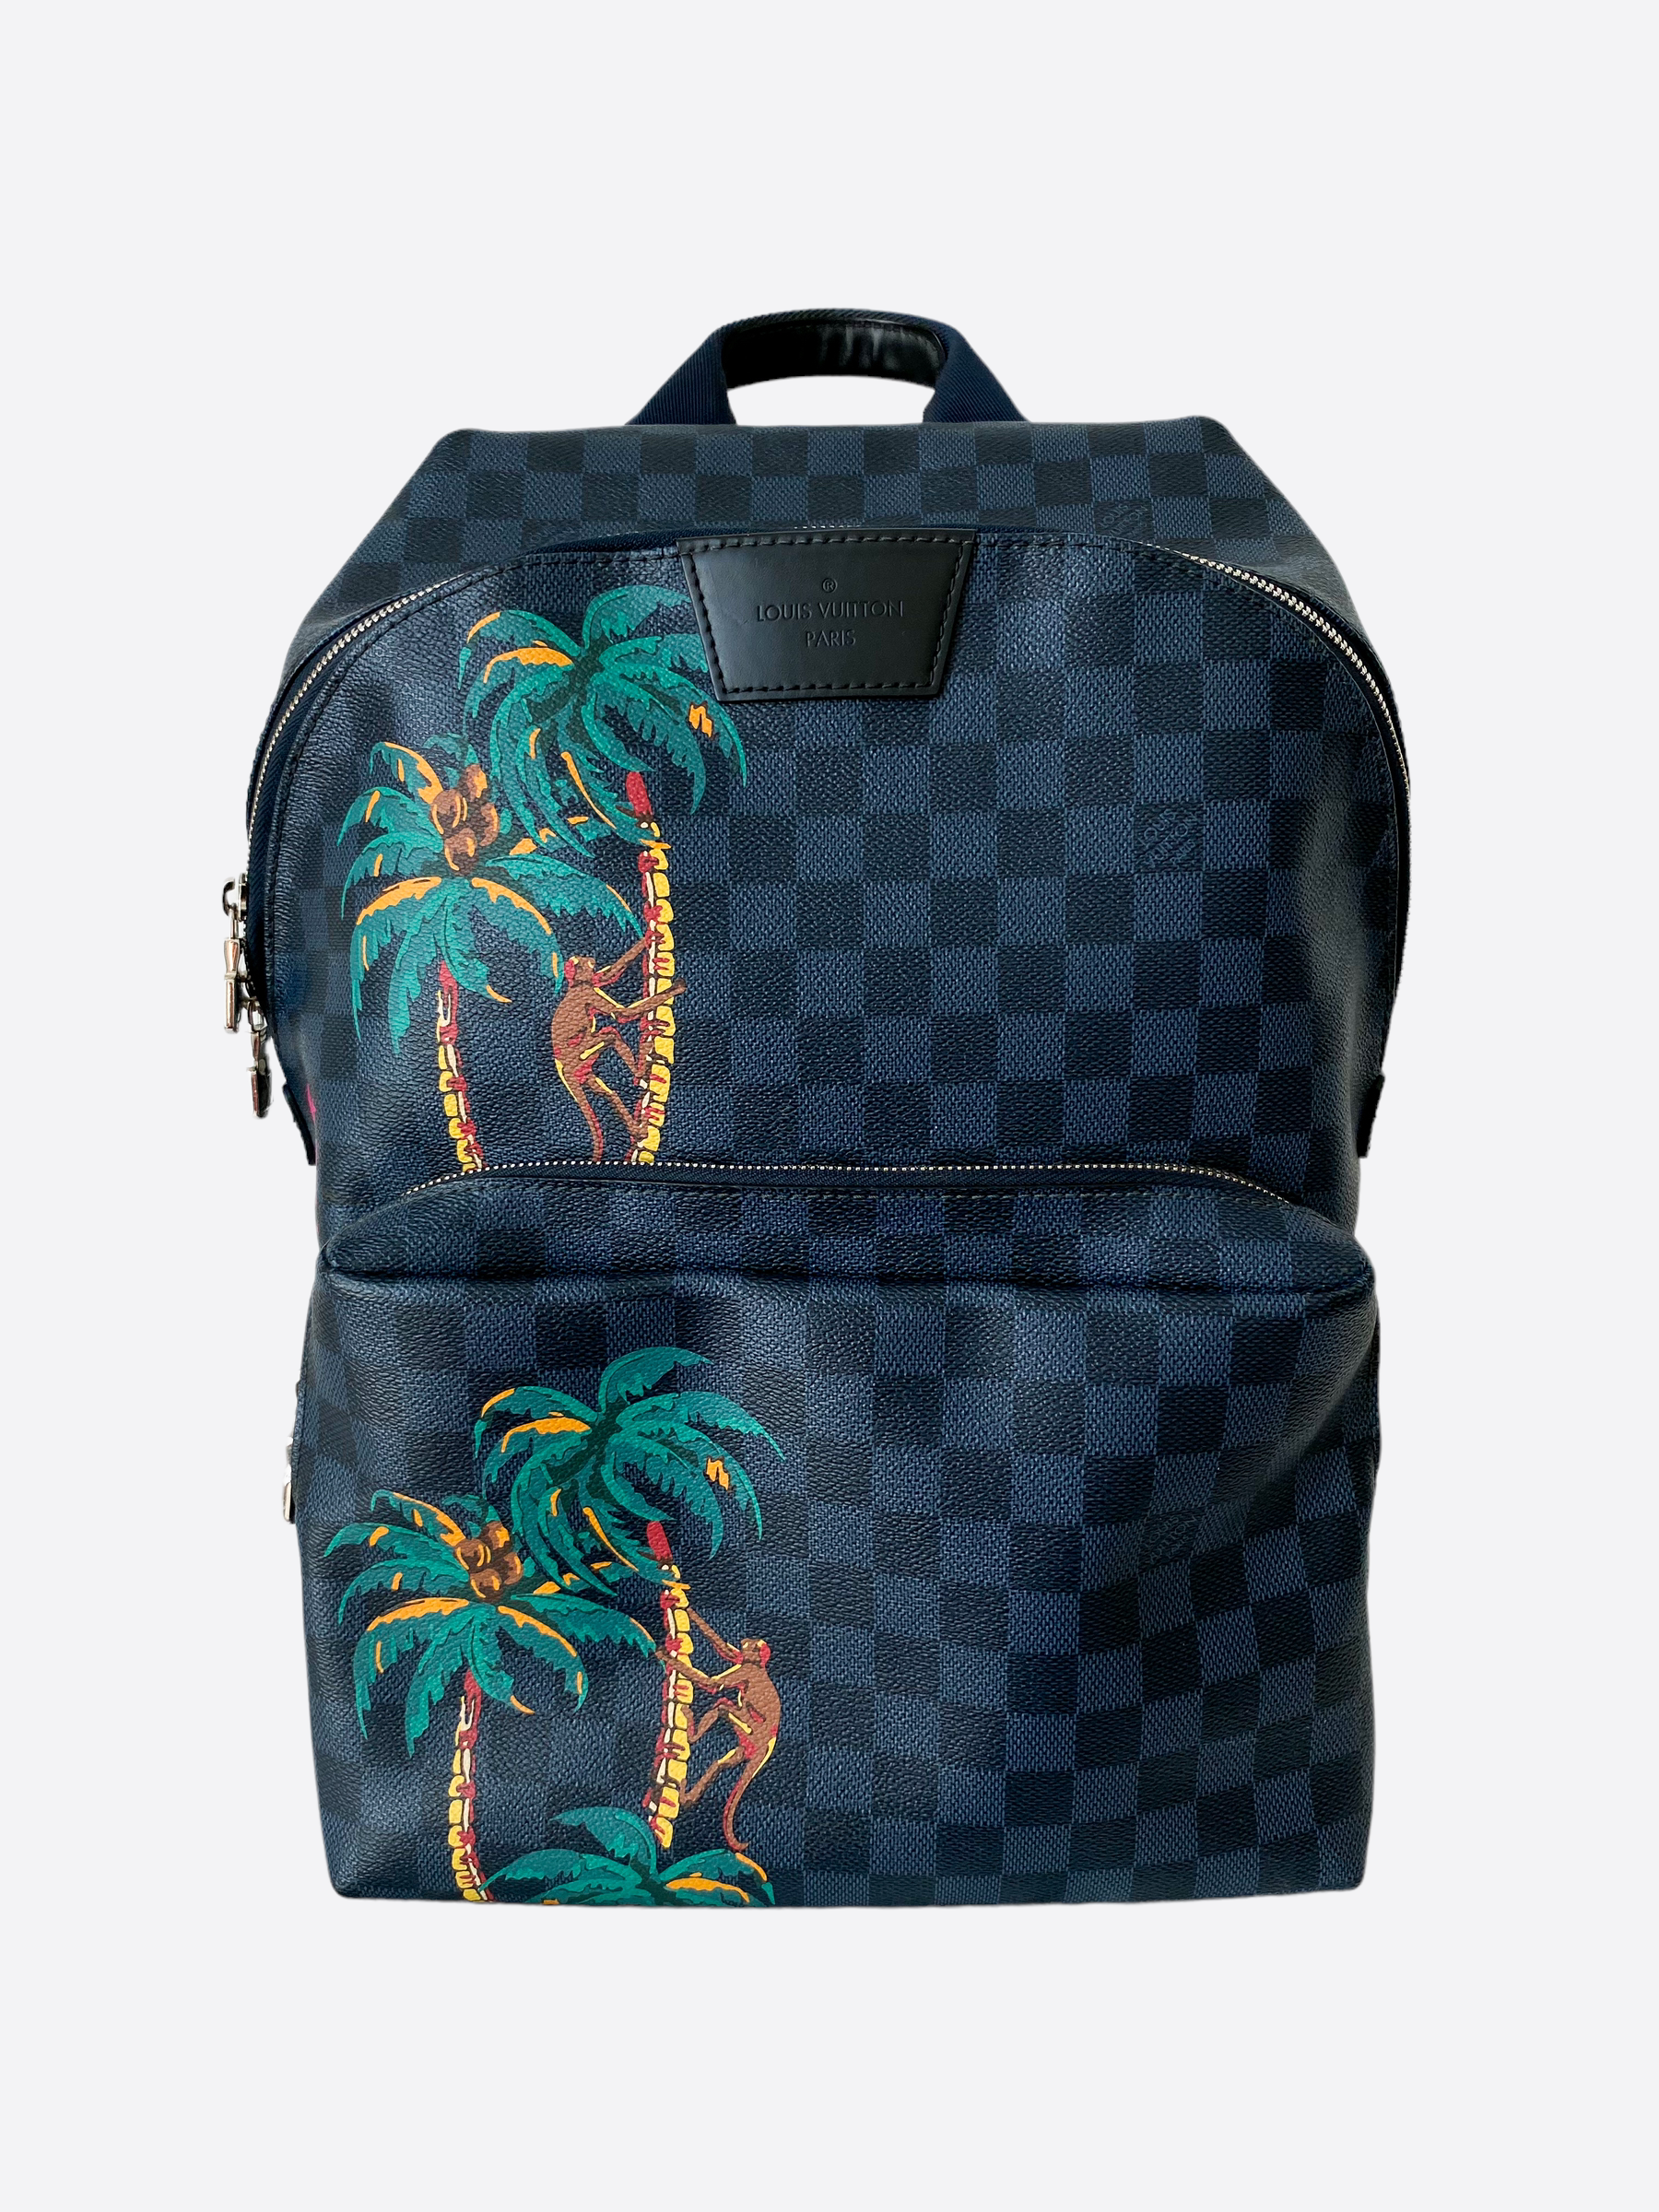 Louis Vuitton Discovery Backpack LV Graffiti Multicolor for Women